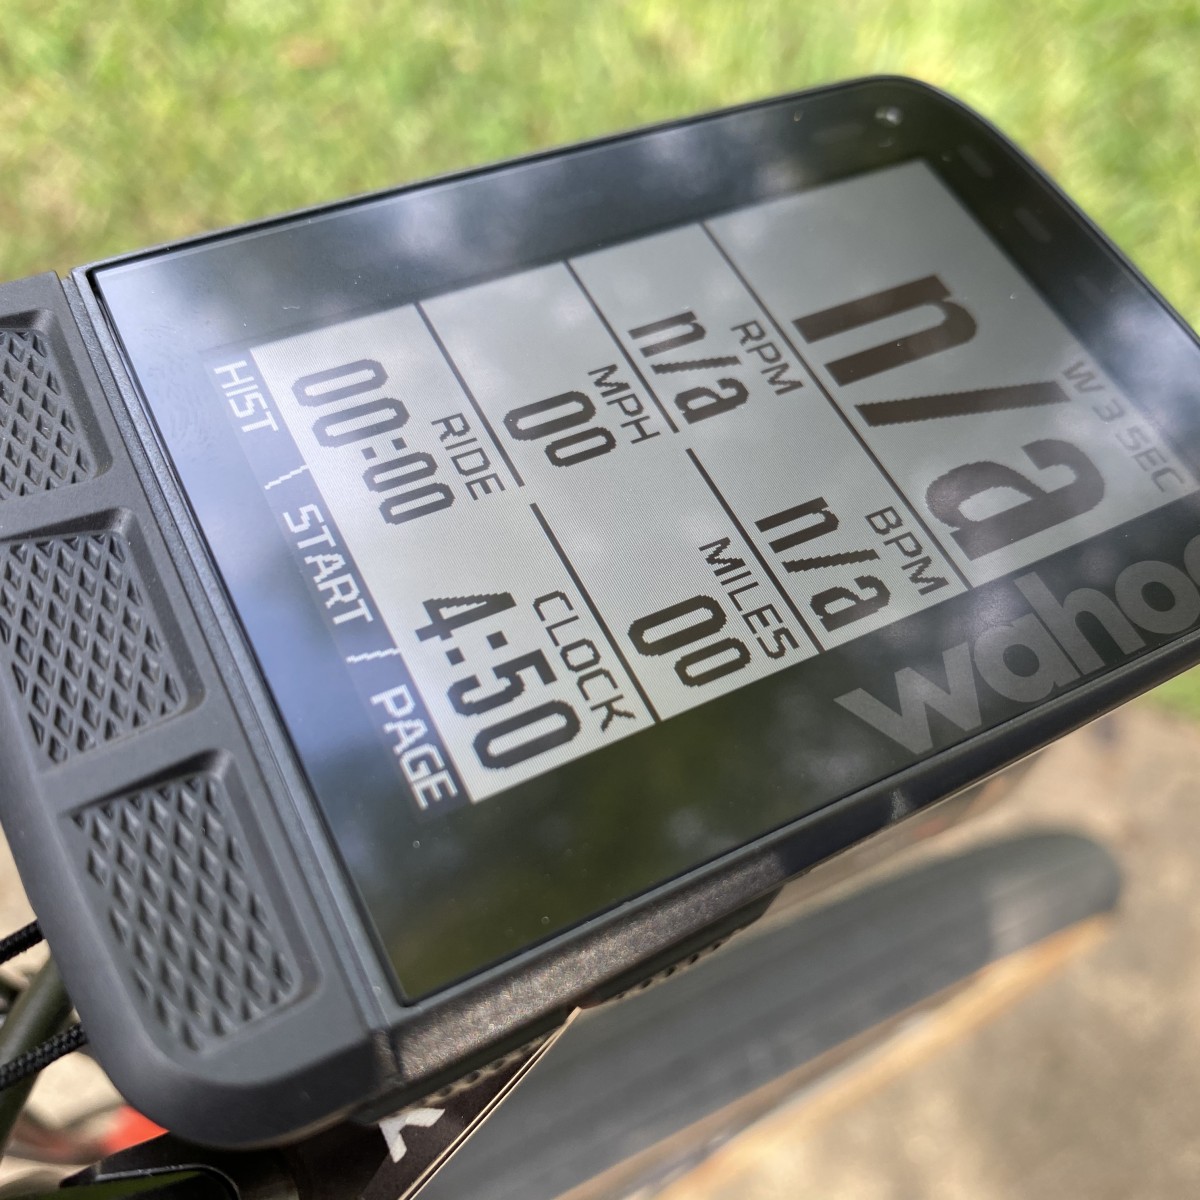 Wahoo Elemnt BOLT 2.0 Review // Are the 2021 updates worth it